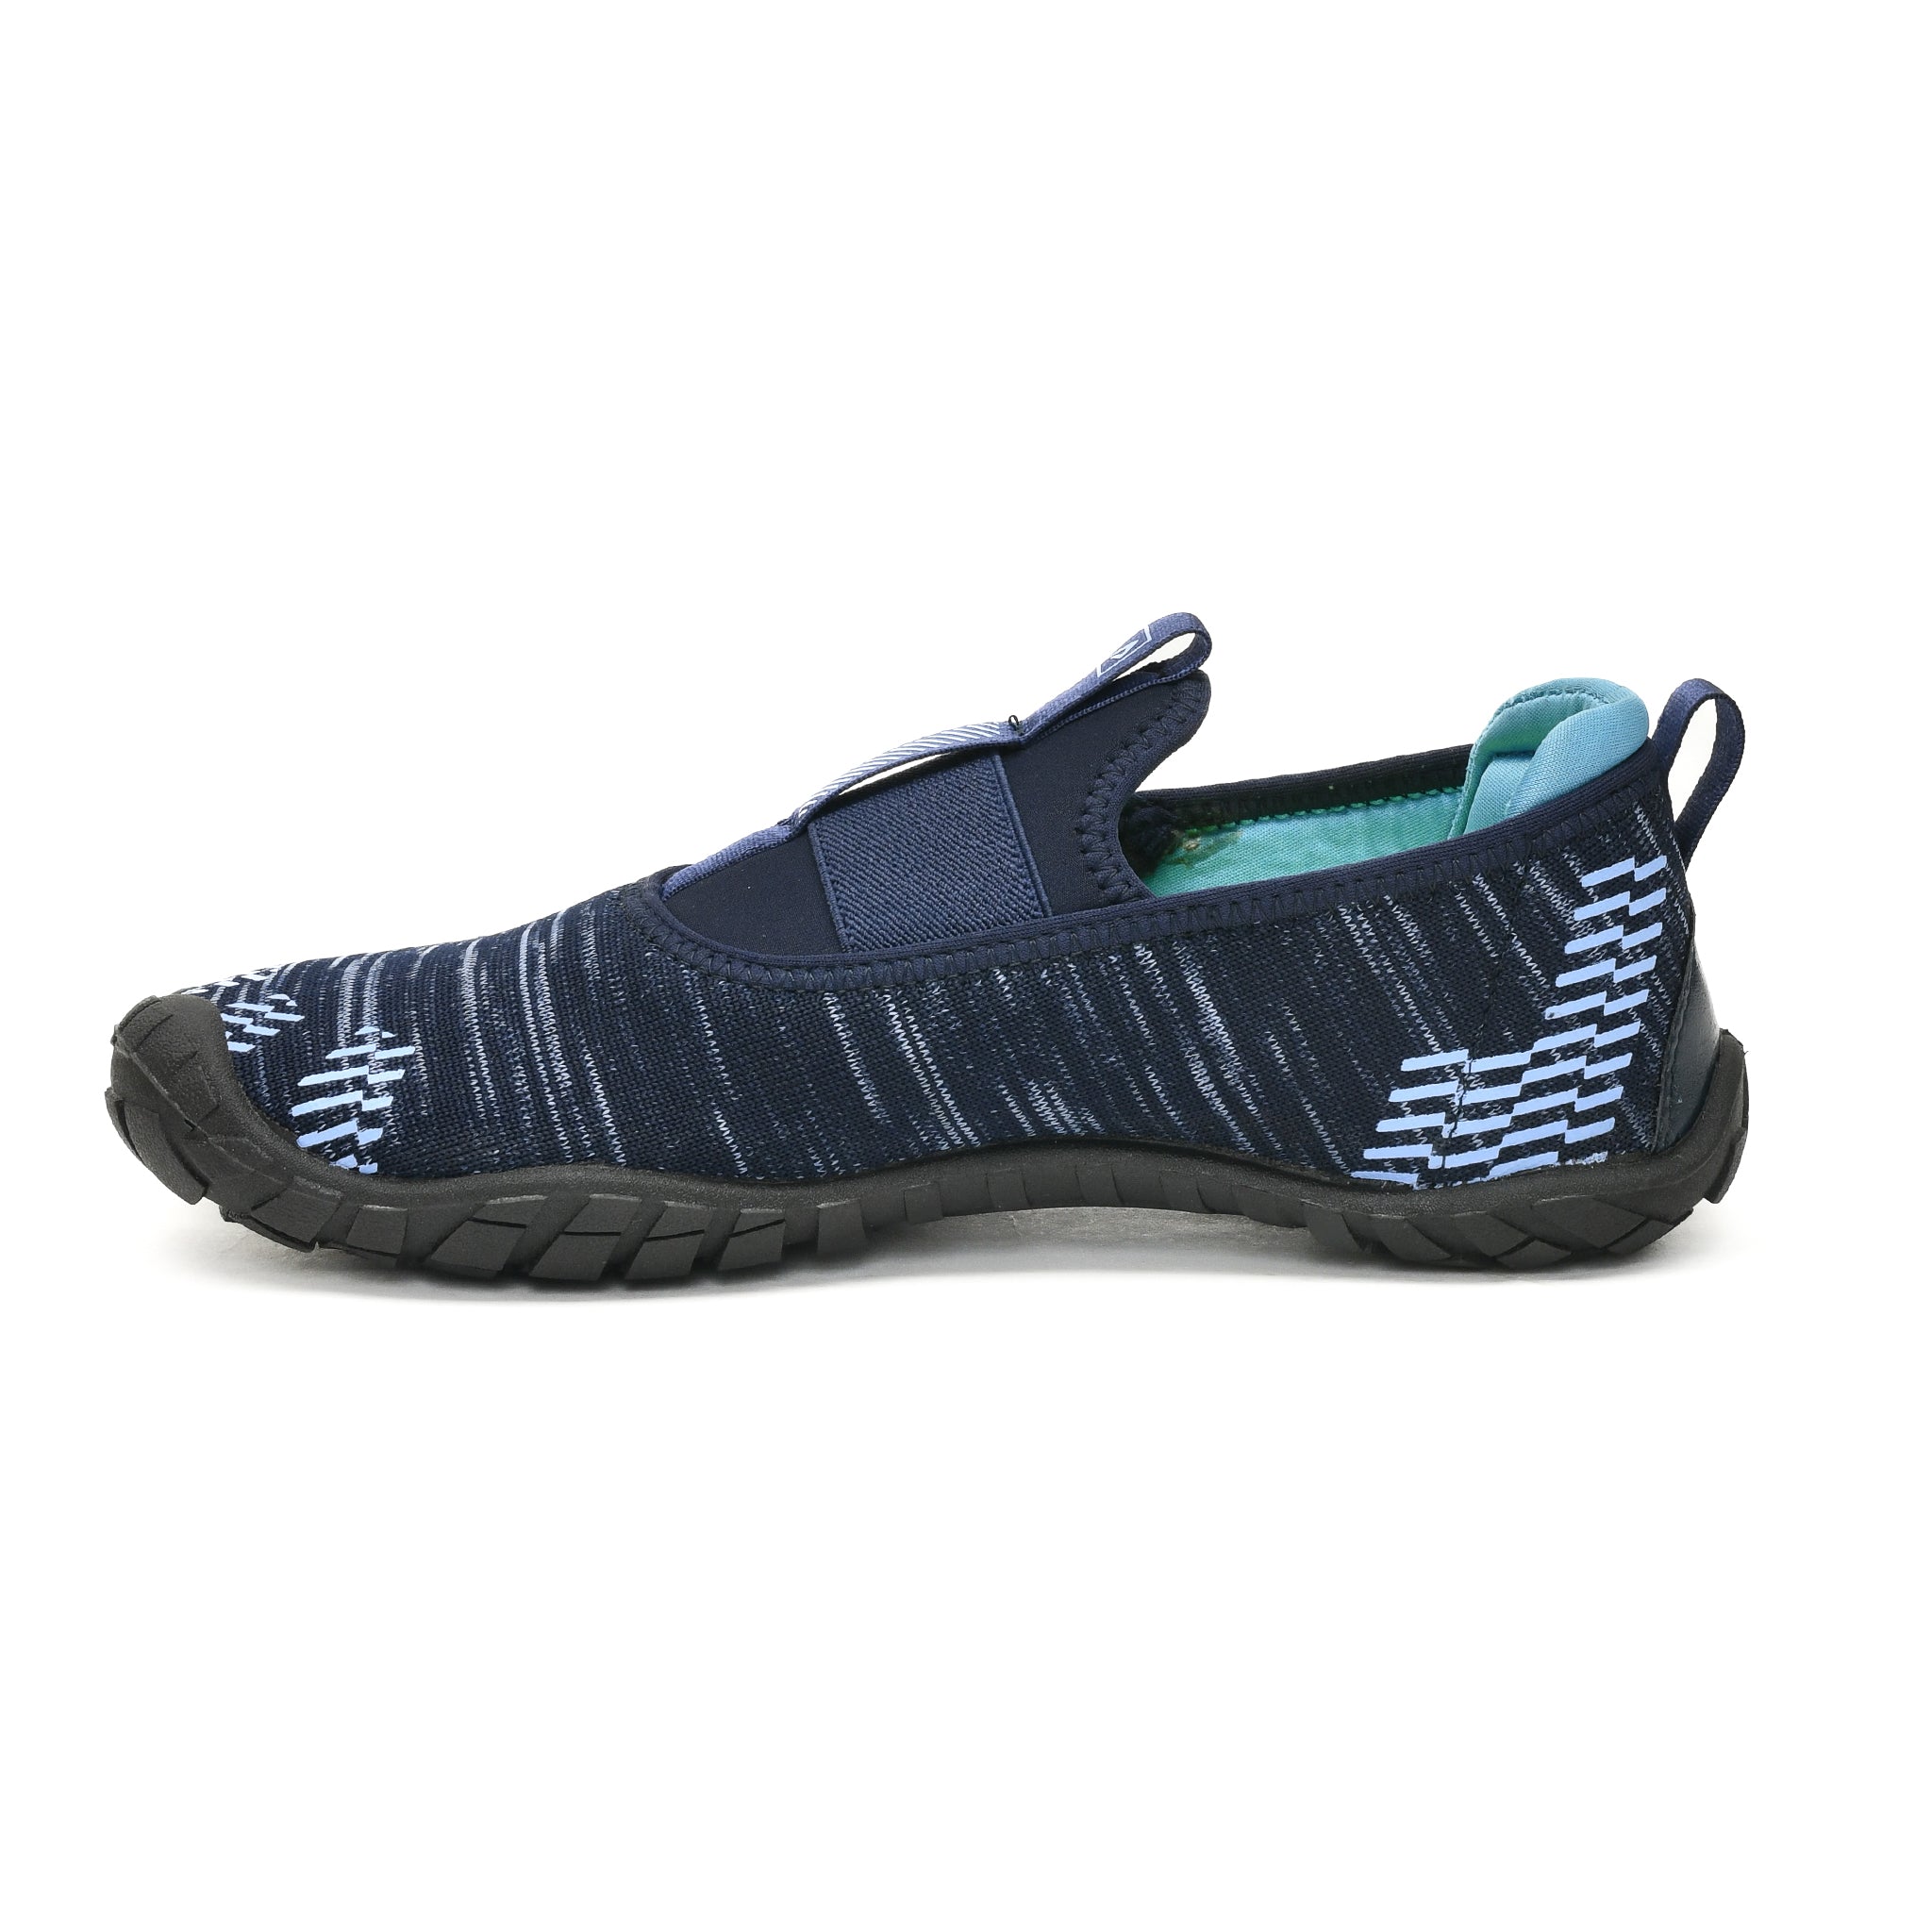 Impakto Barefoot Rooted Men's Multi Gym Shoes